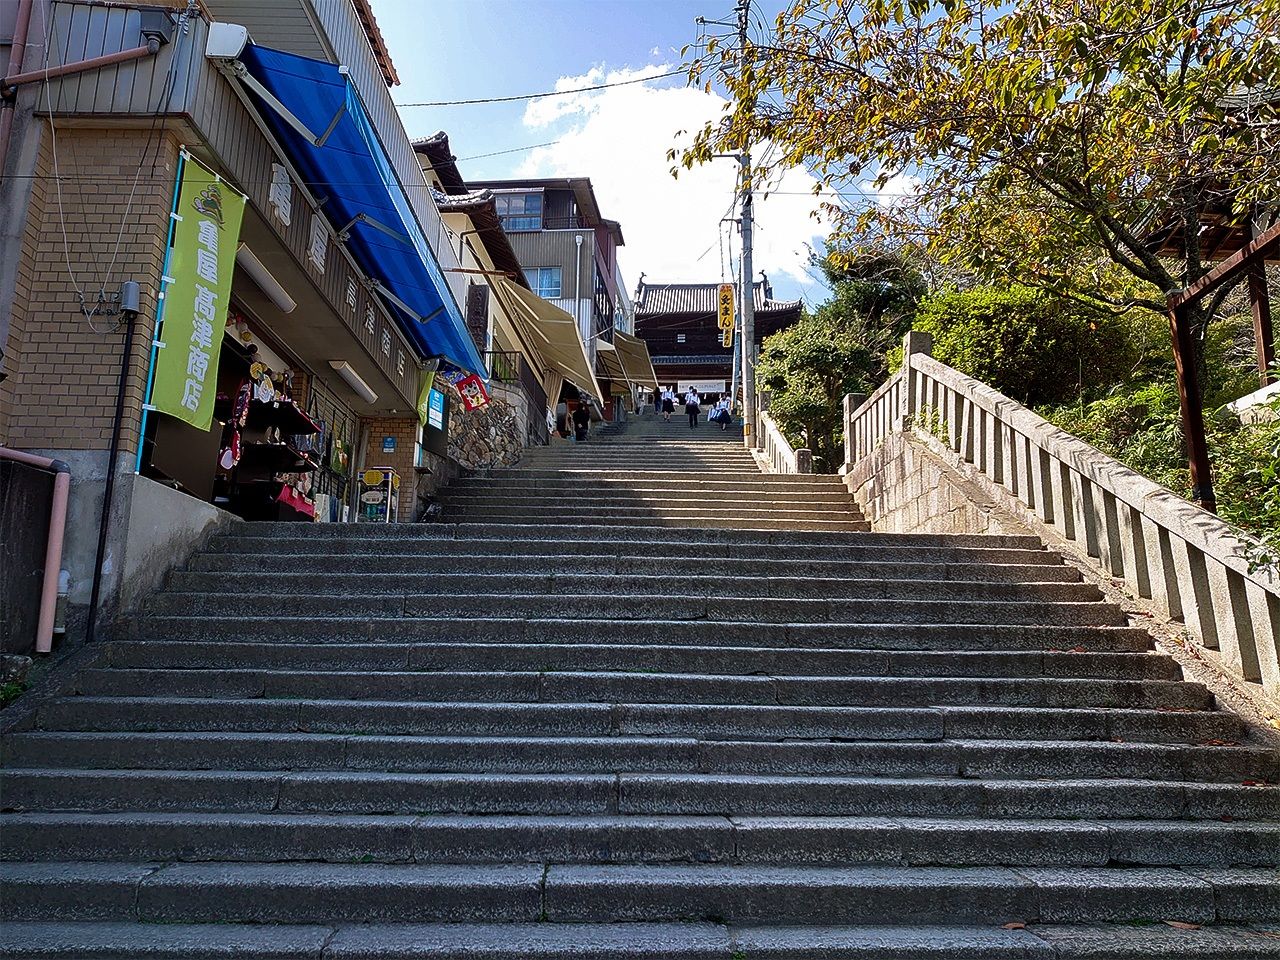 The stone steps up from the main gate, known as Ichinozaka.